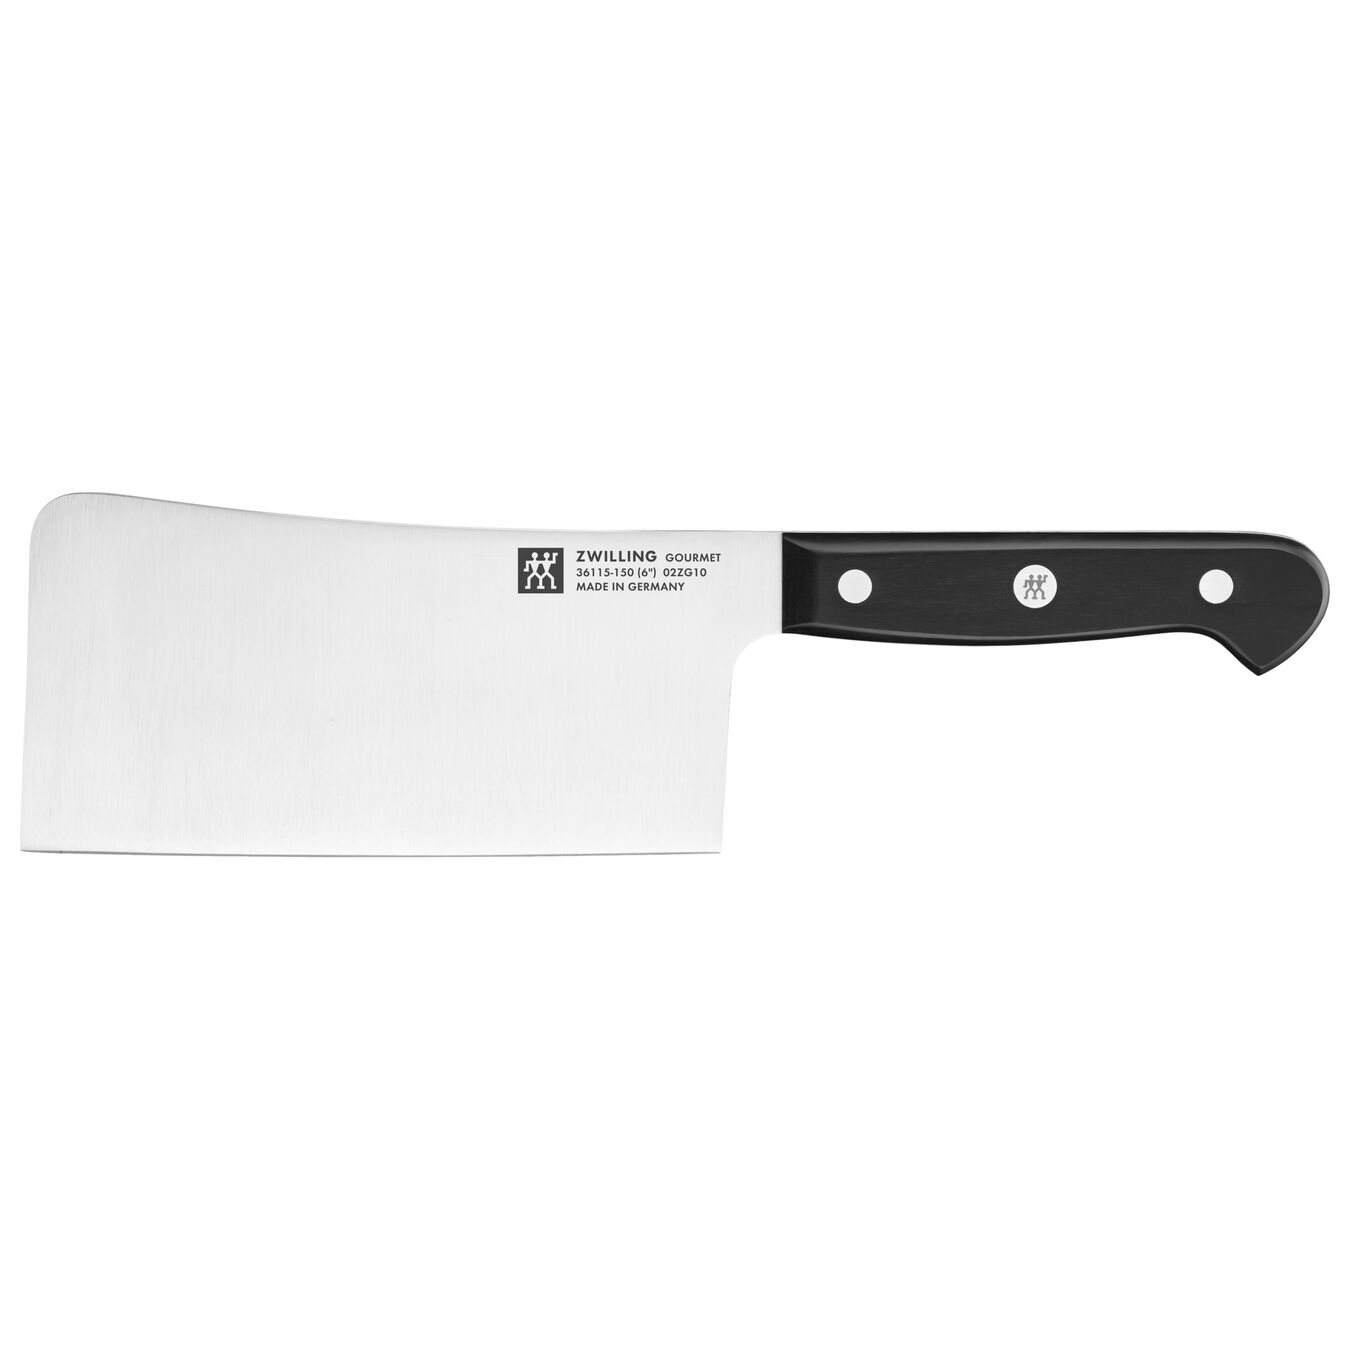 6-inch, Cleaver - Visual Imperfections,,large 1